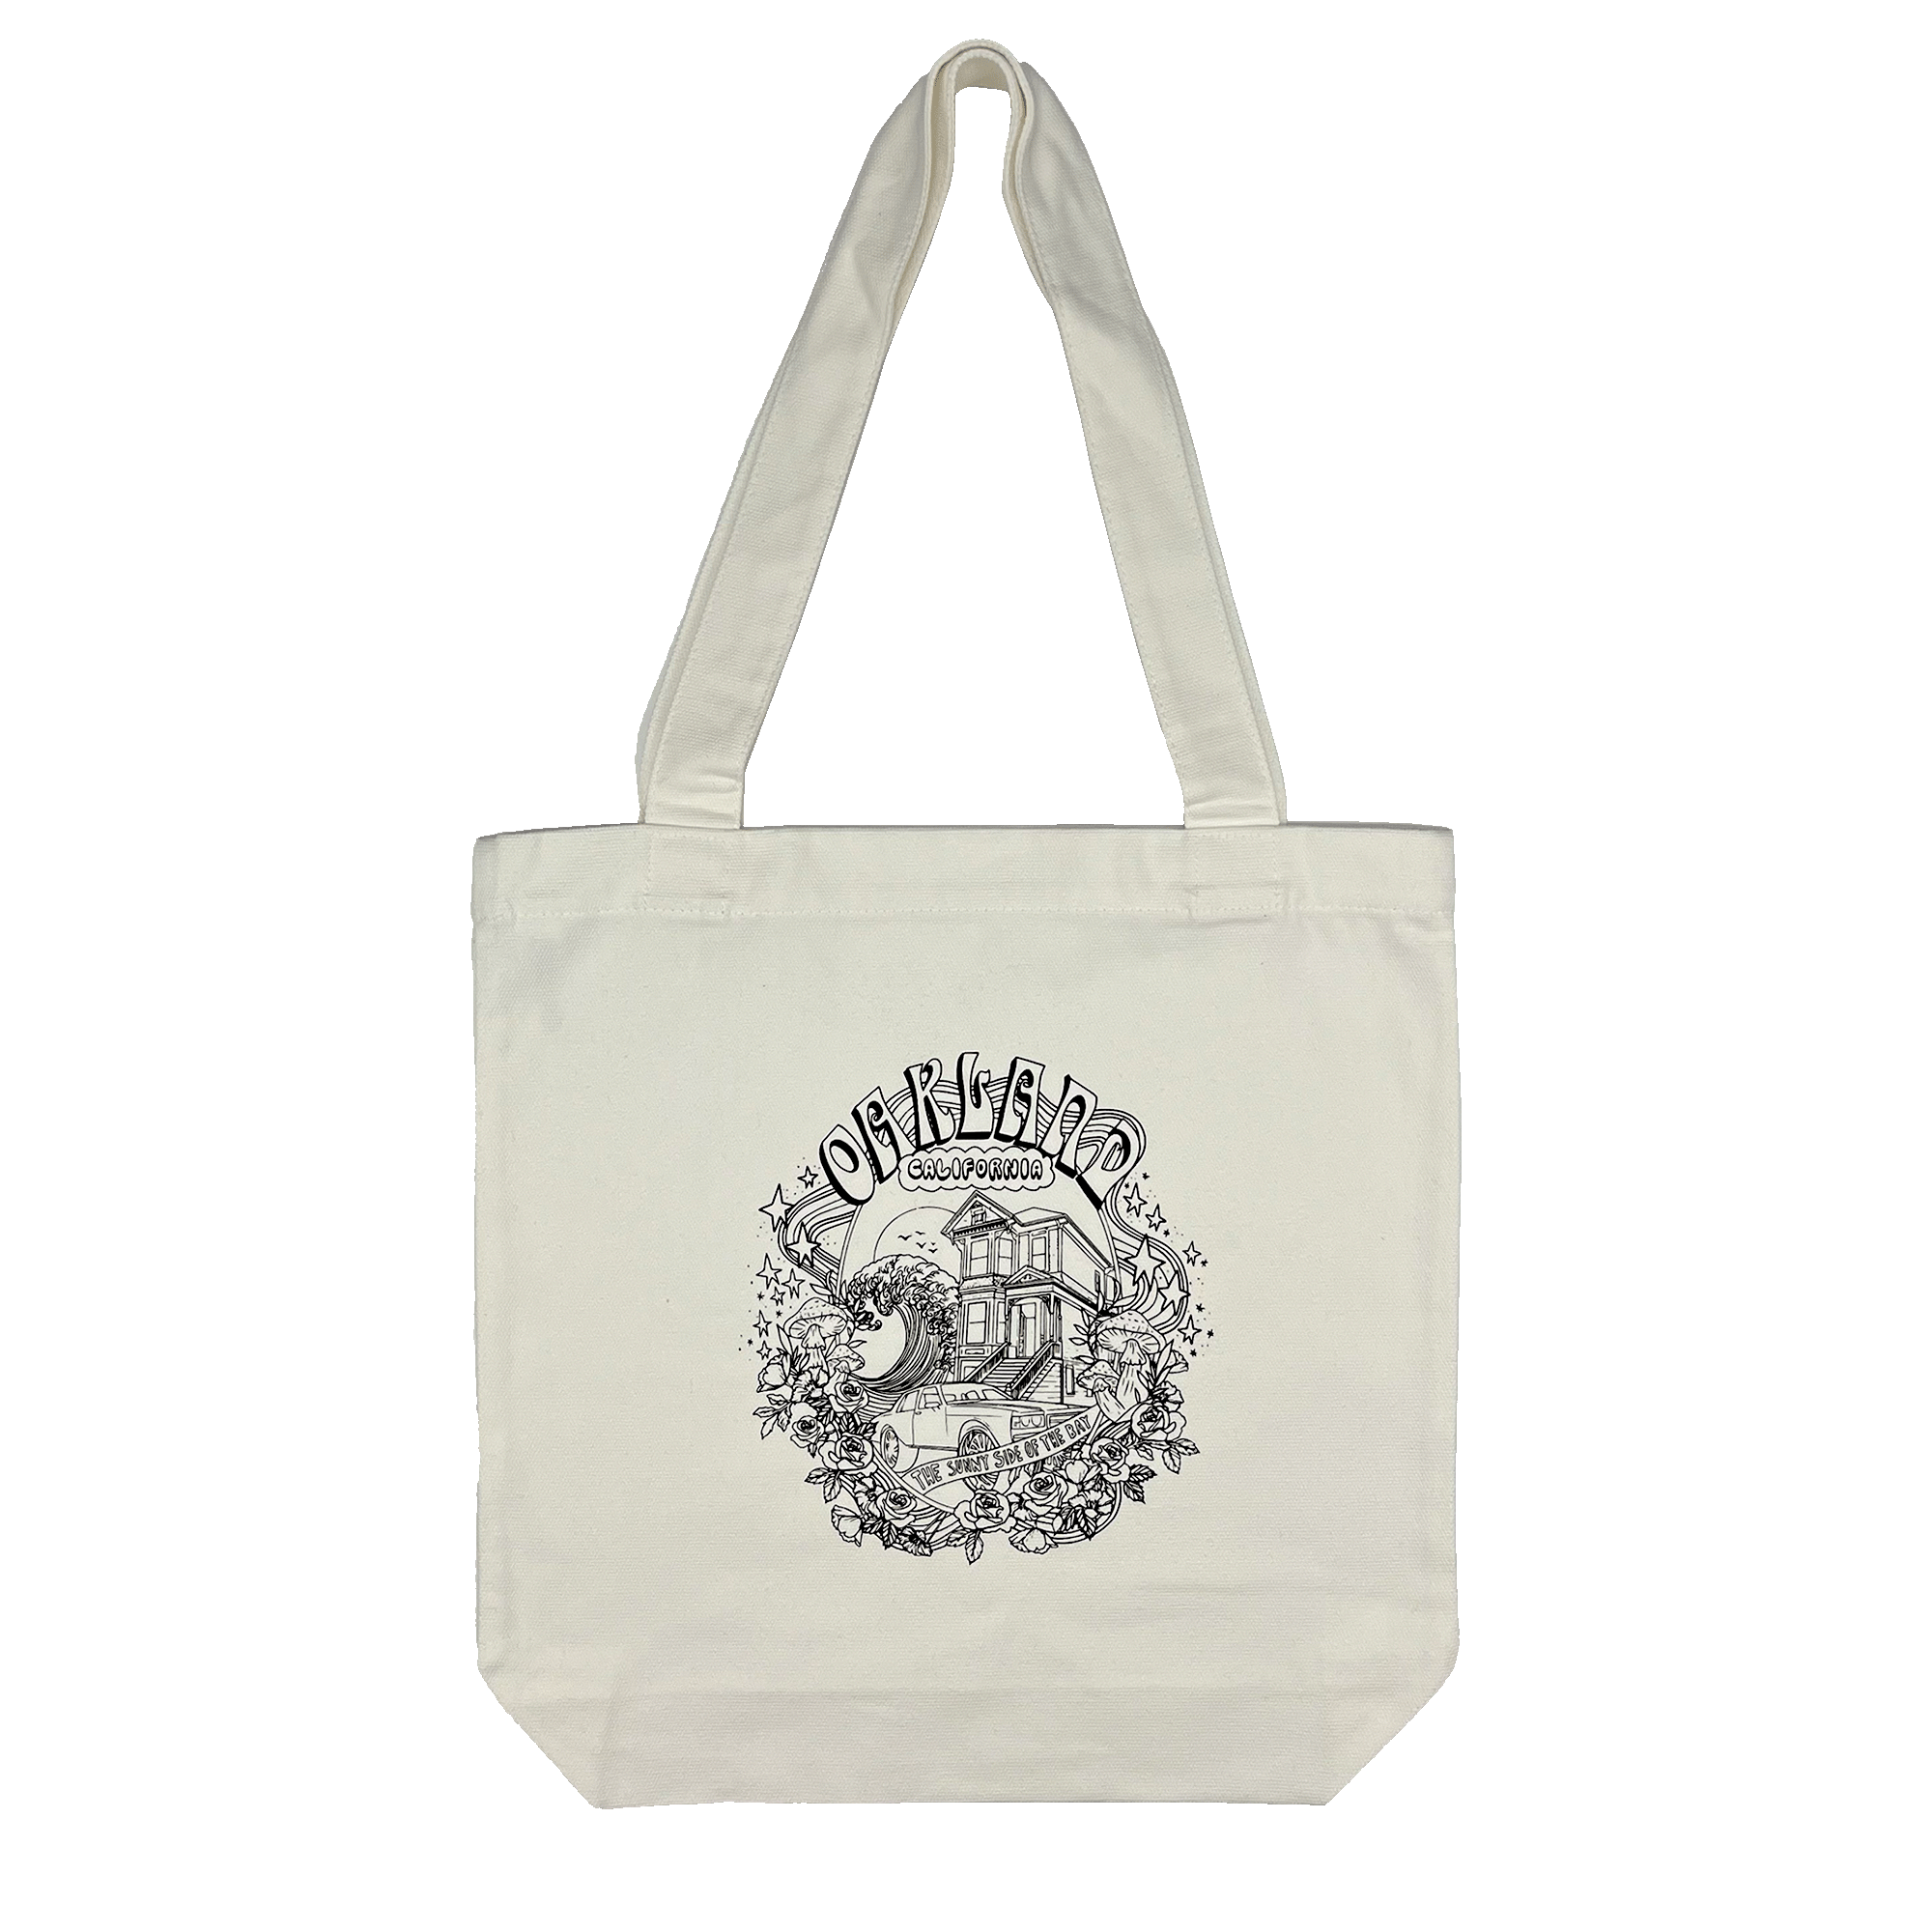 Canvas cotton shopping tote bag with black dreamy Oakland California pictorial graphic.